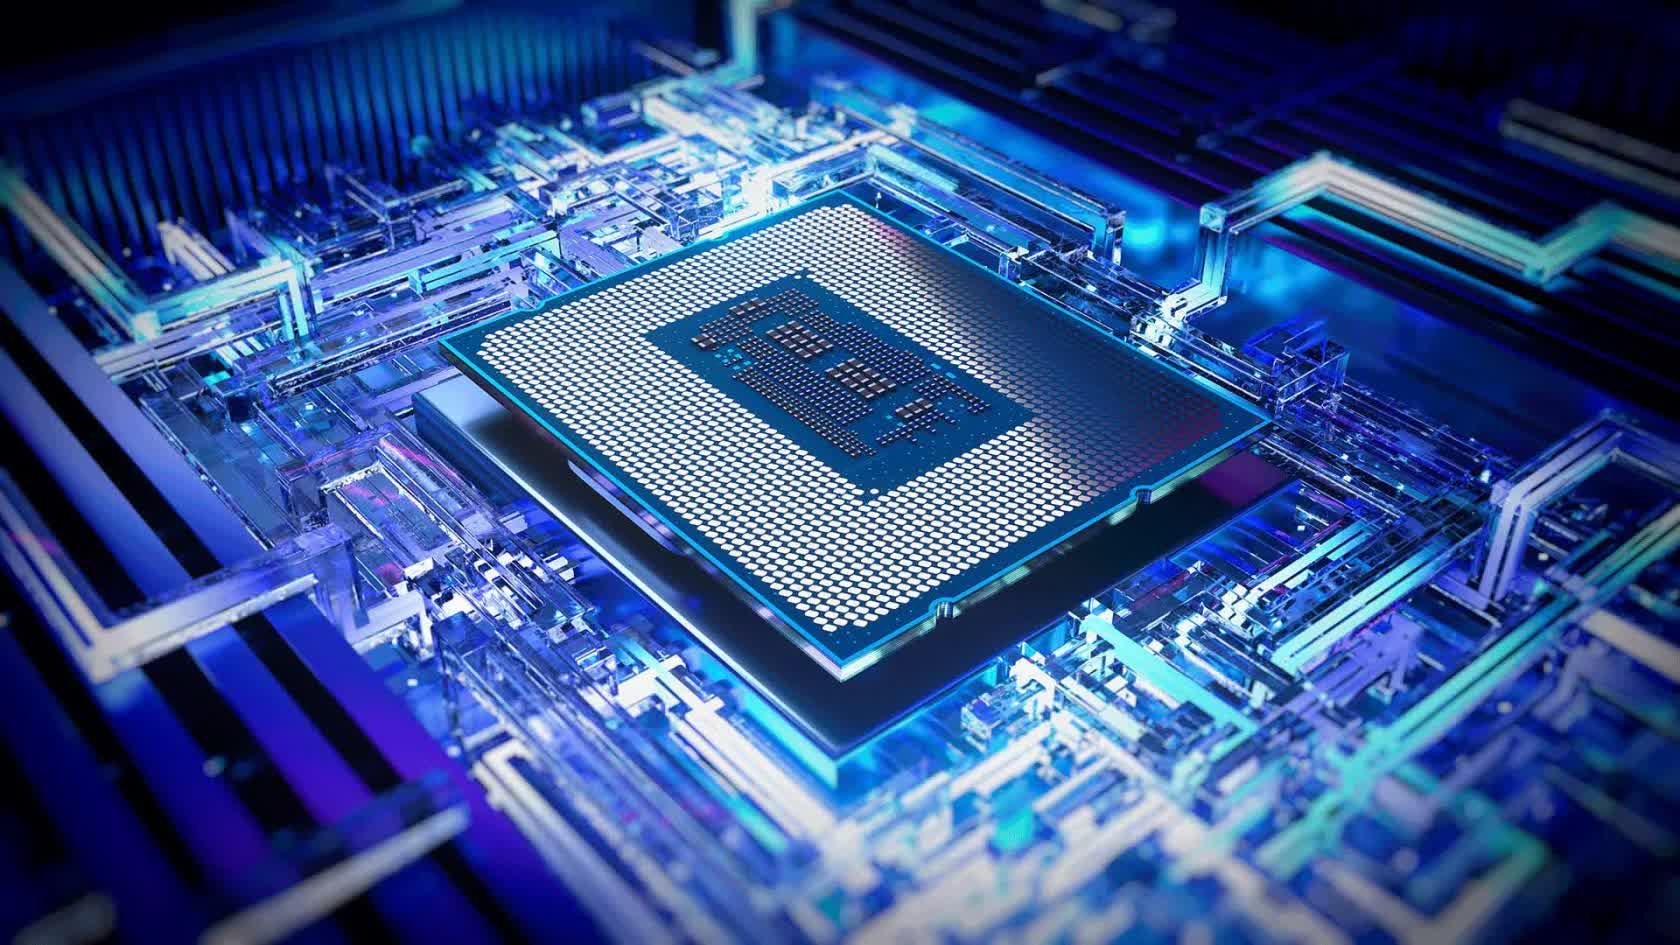 Sapphire Rapids 56-core Xeon workstation CPU is 47% faster than its predecessor